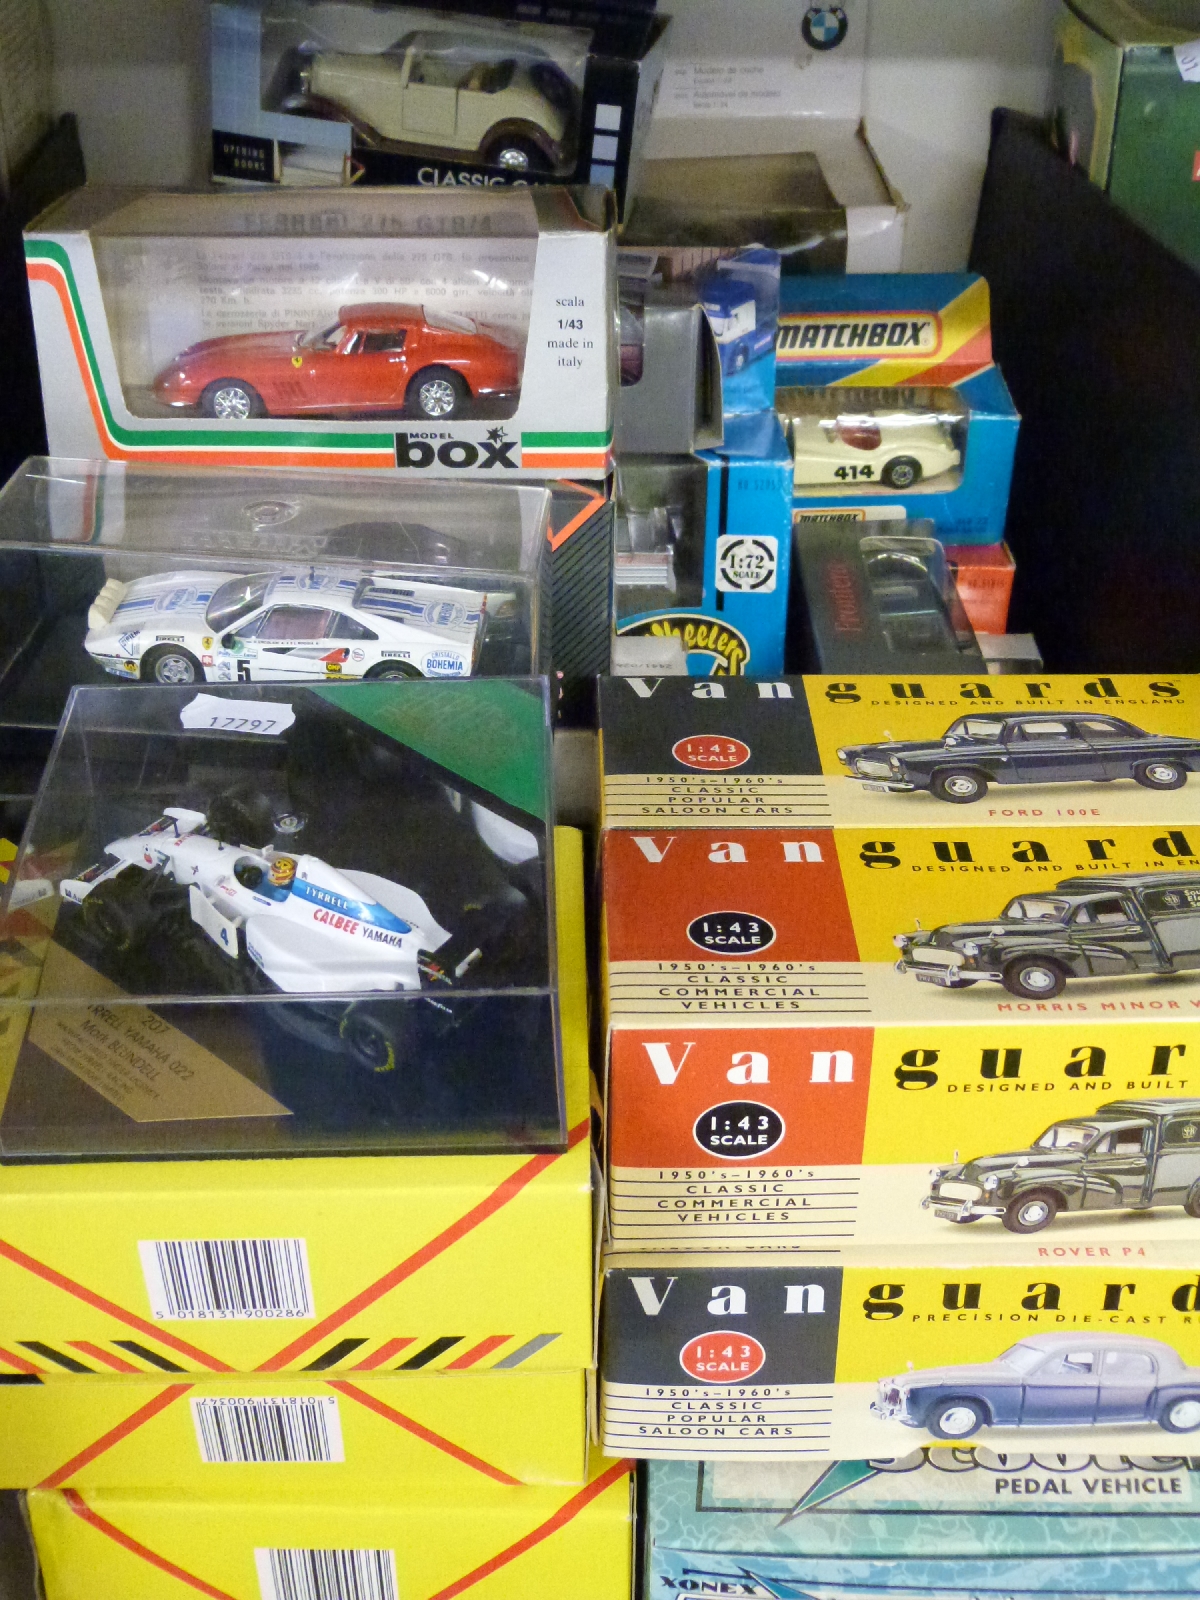 Over 30 Matchbox, Vanguards, Xonex, Lledo and other diecast model vehicles, all in original boxes. - Image 2 of 2